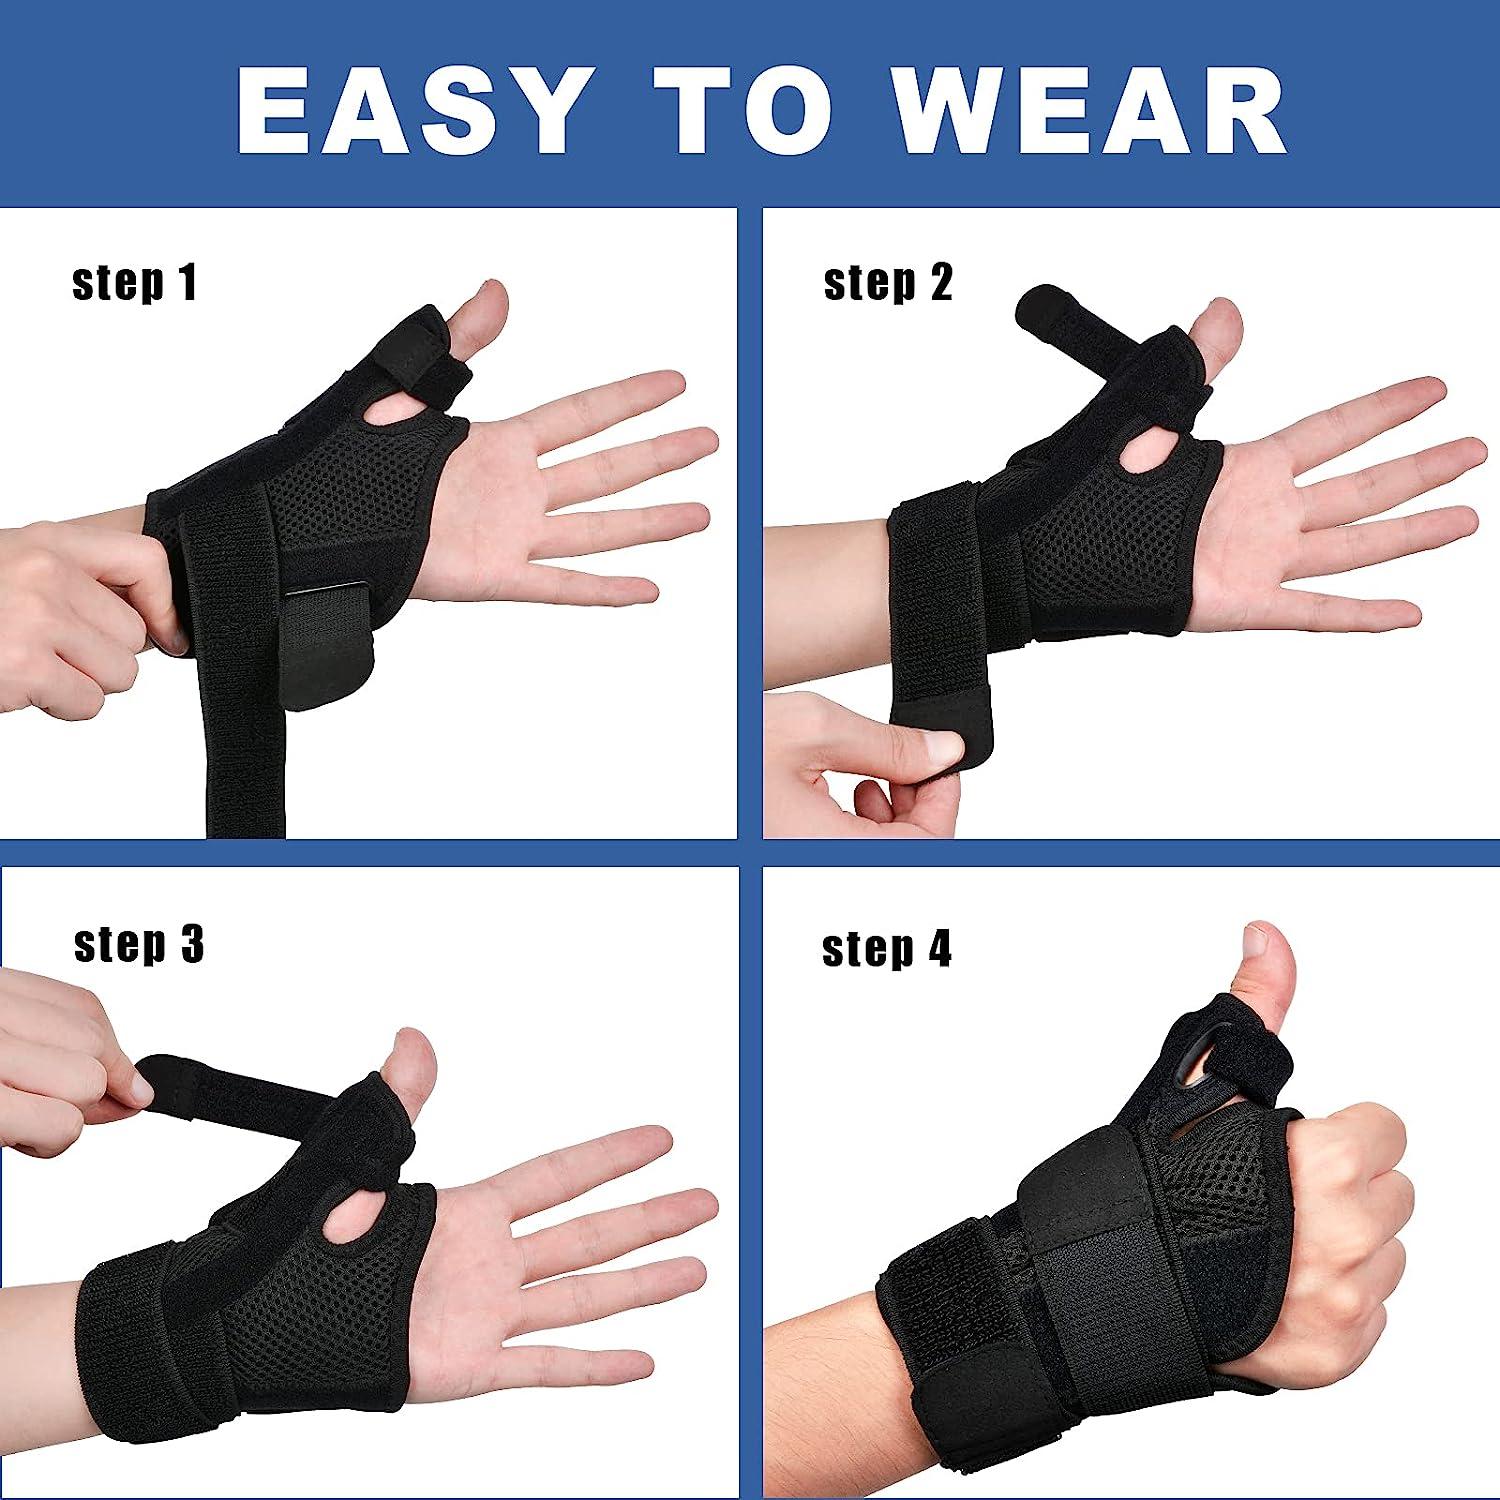 Thumb Splint with Wrist Support Brace-Thumb Brace for Carpal Tunnel or  Tendonitis Pain Relief,Wrist Brace Fits Both Left and Right Hands,Thumb  Spica Splint Stabilizer for Men or Women Universal